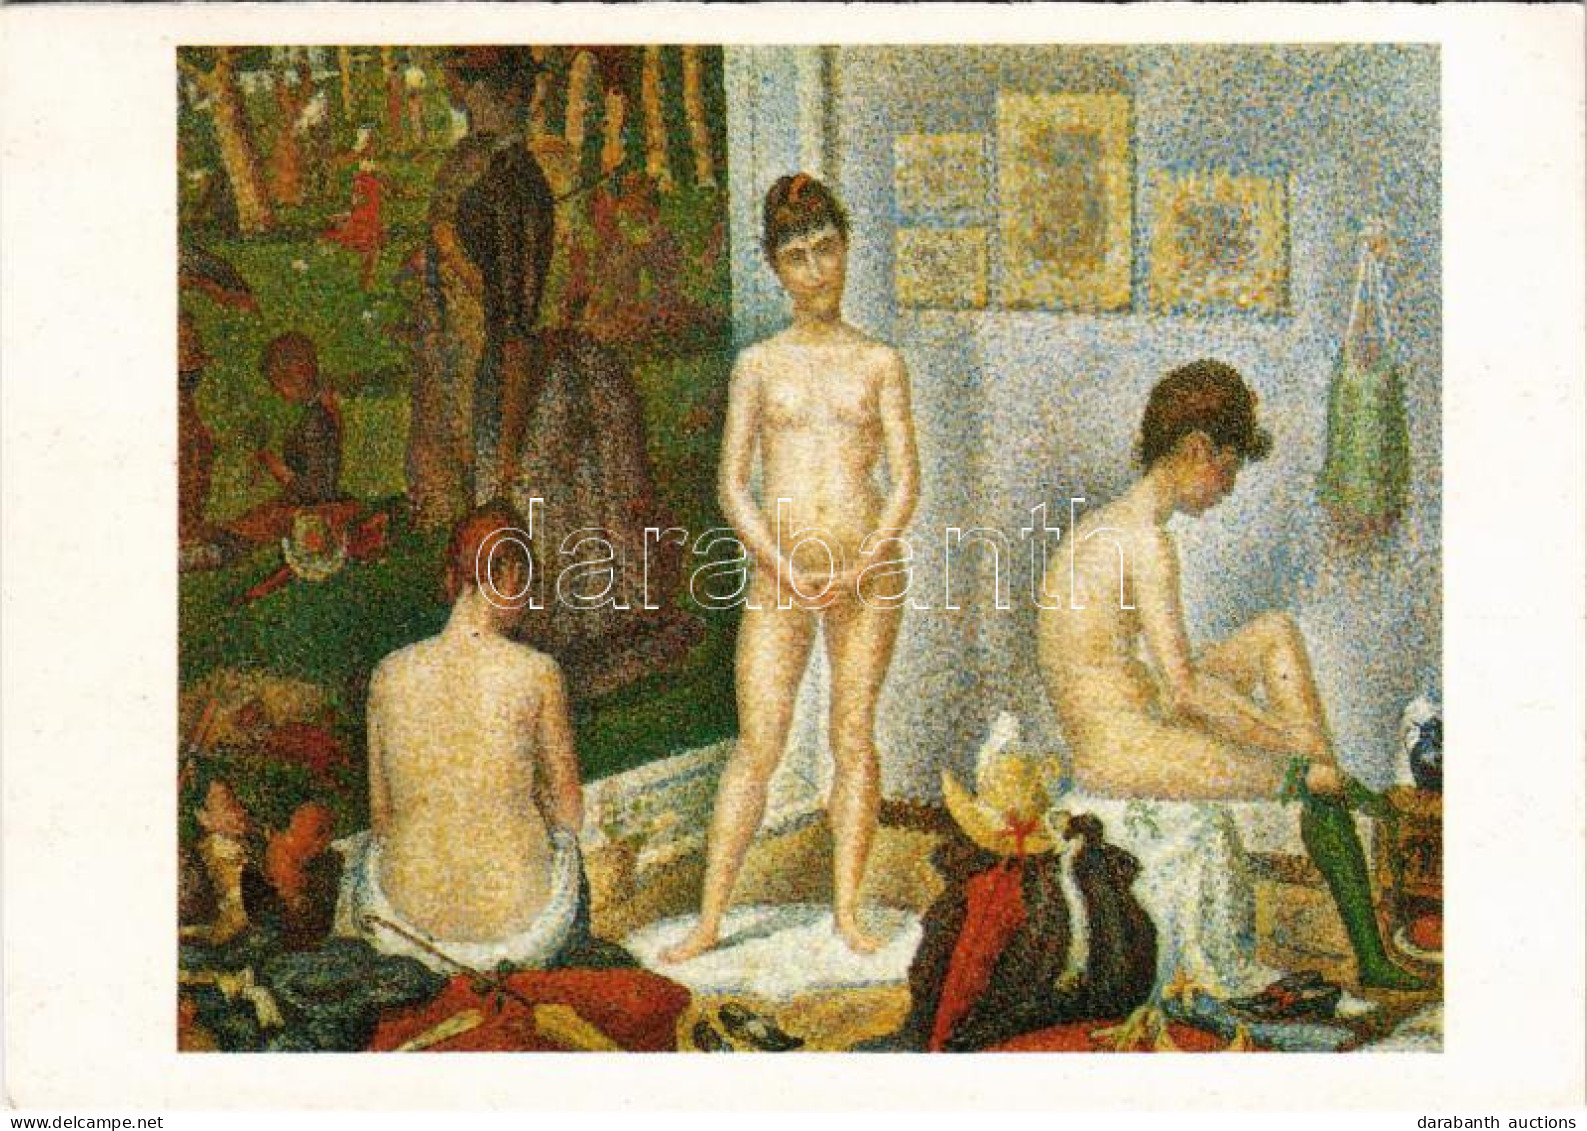 * T2 Les Poseuses / The Models. French Gently Erotic Art Postcard S: Georges Seurat (1888) - Ohne Zuordnung